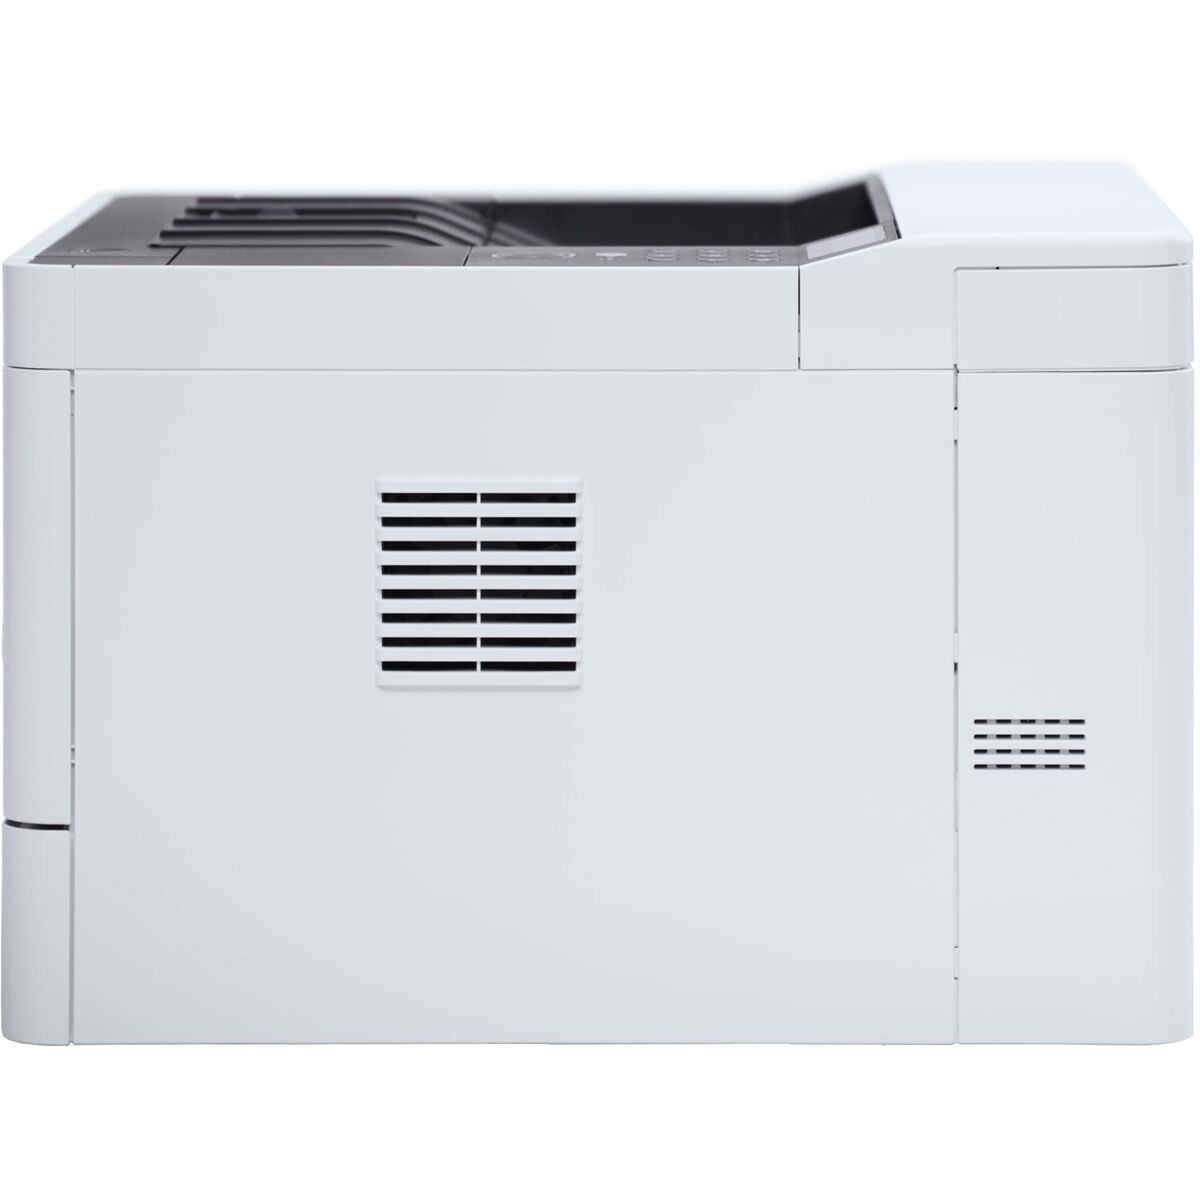 Multifunction Printer Kyocera ECOSYS P2040dn, Kyocera, Computing, Printers and accessories, multifunction-printer-kyocera-ecosys-p2040dn, :Inkjet Printers, :Laser Printer, :Multifunction Printer, Brand_Kyocera, category-reference-2609, category-reference-2642, category-reference-2645, category-reference-t-19685, category-reference-t-19911, category-reference-t-21378, computers / peripherals, Condition_NEW, office, Price_200 - 300, Teleworking, RiotNook